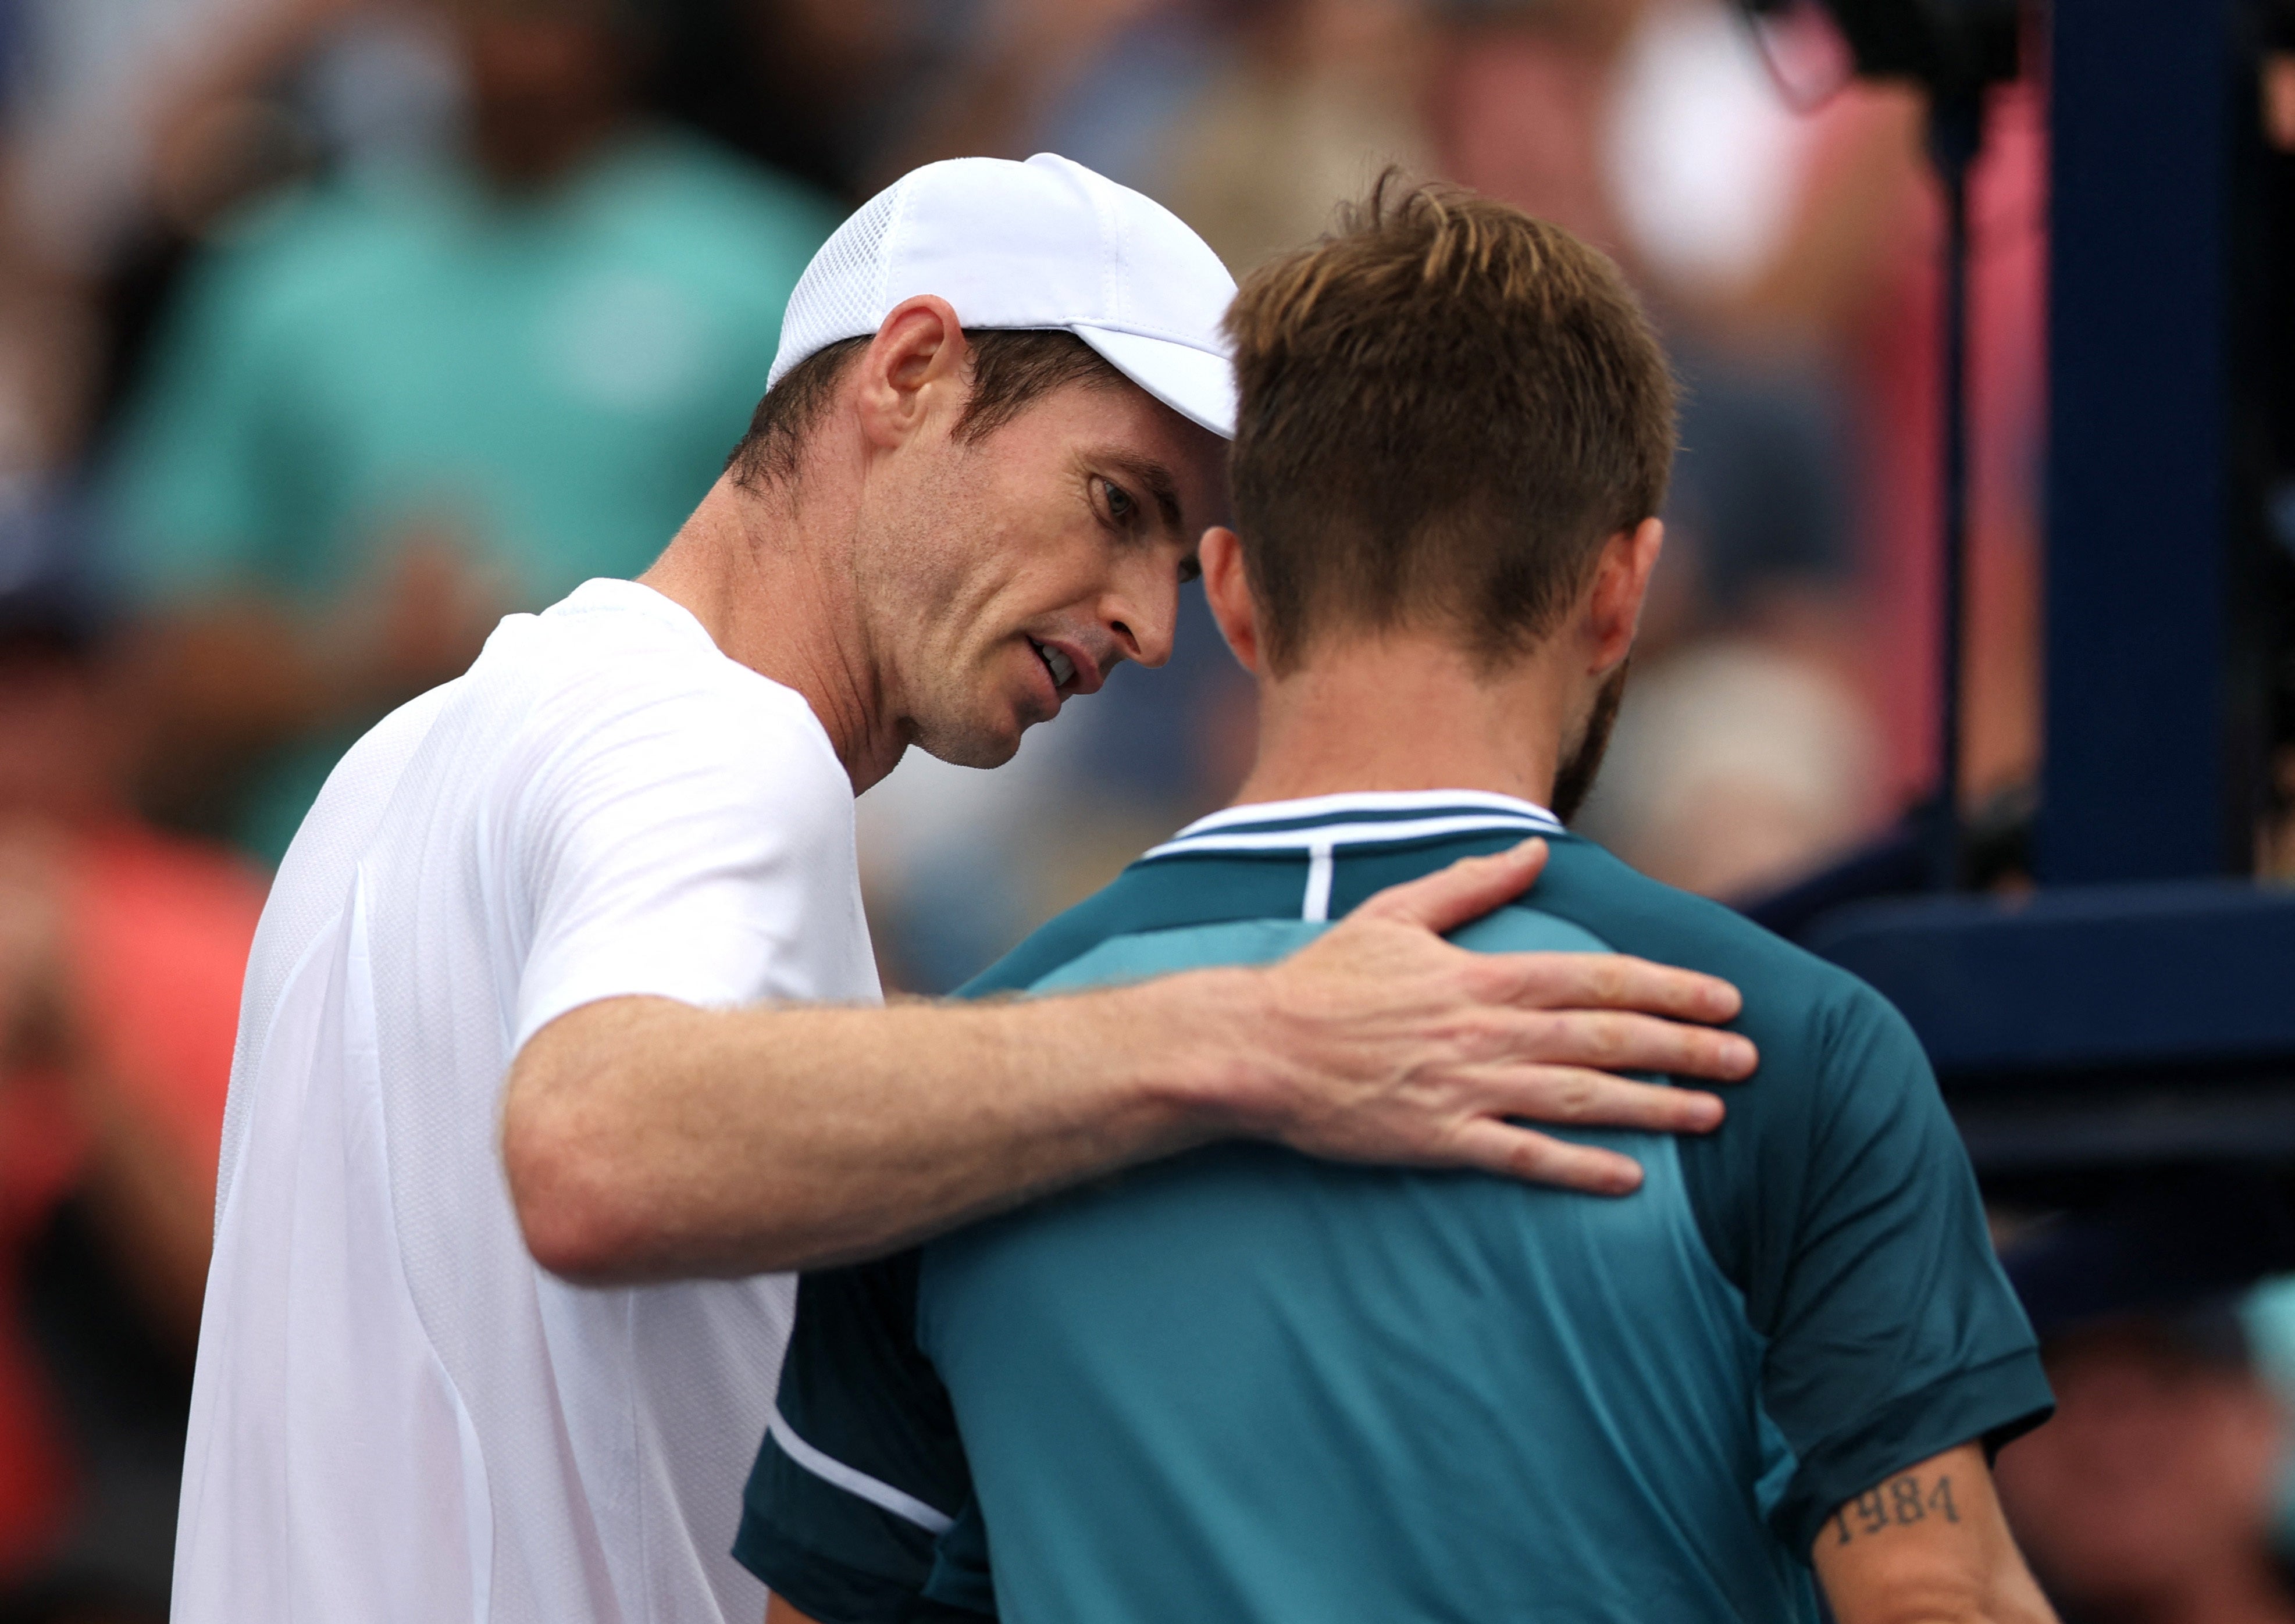 Andy Murray consoles Corentin Moutet after their first round match